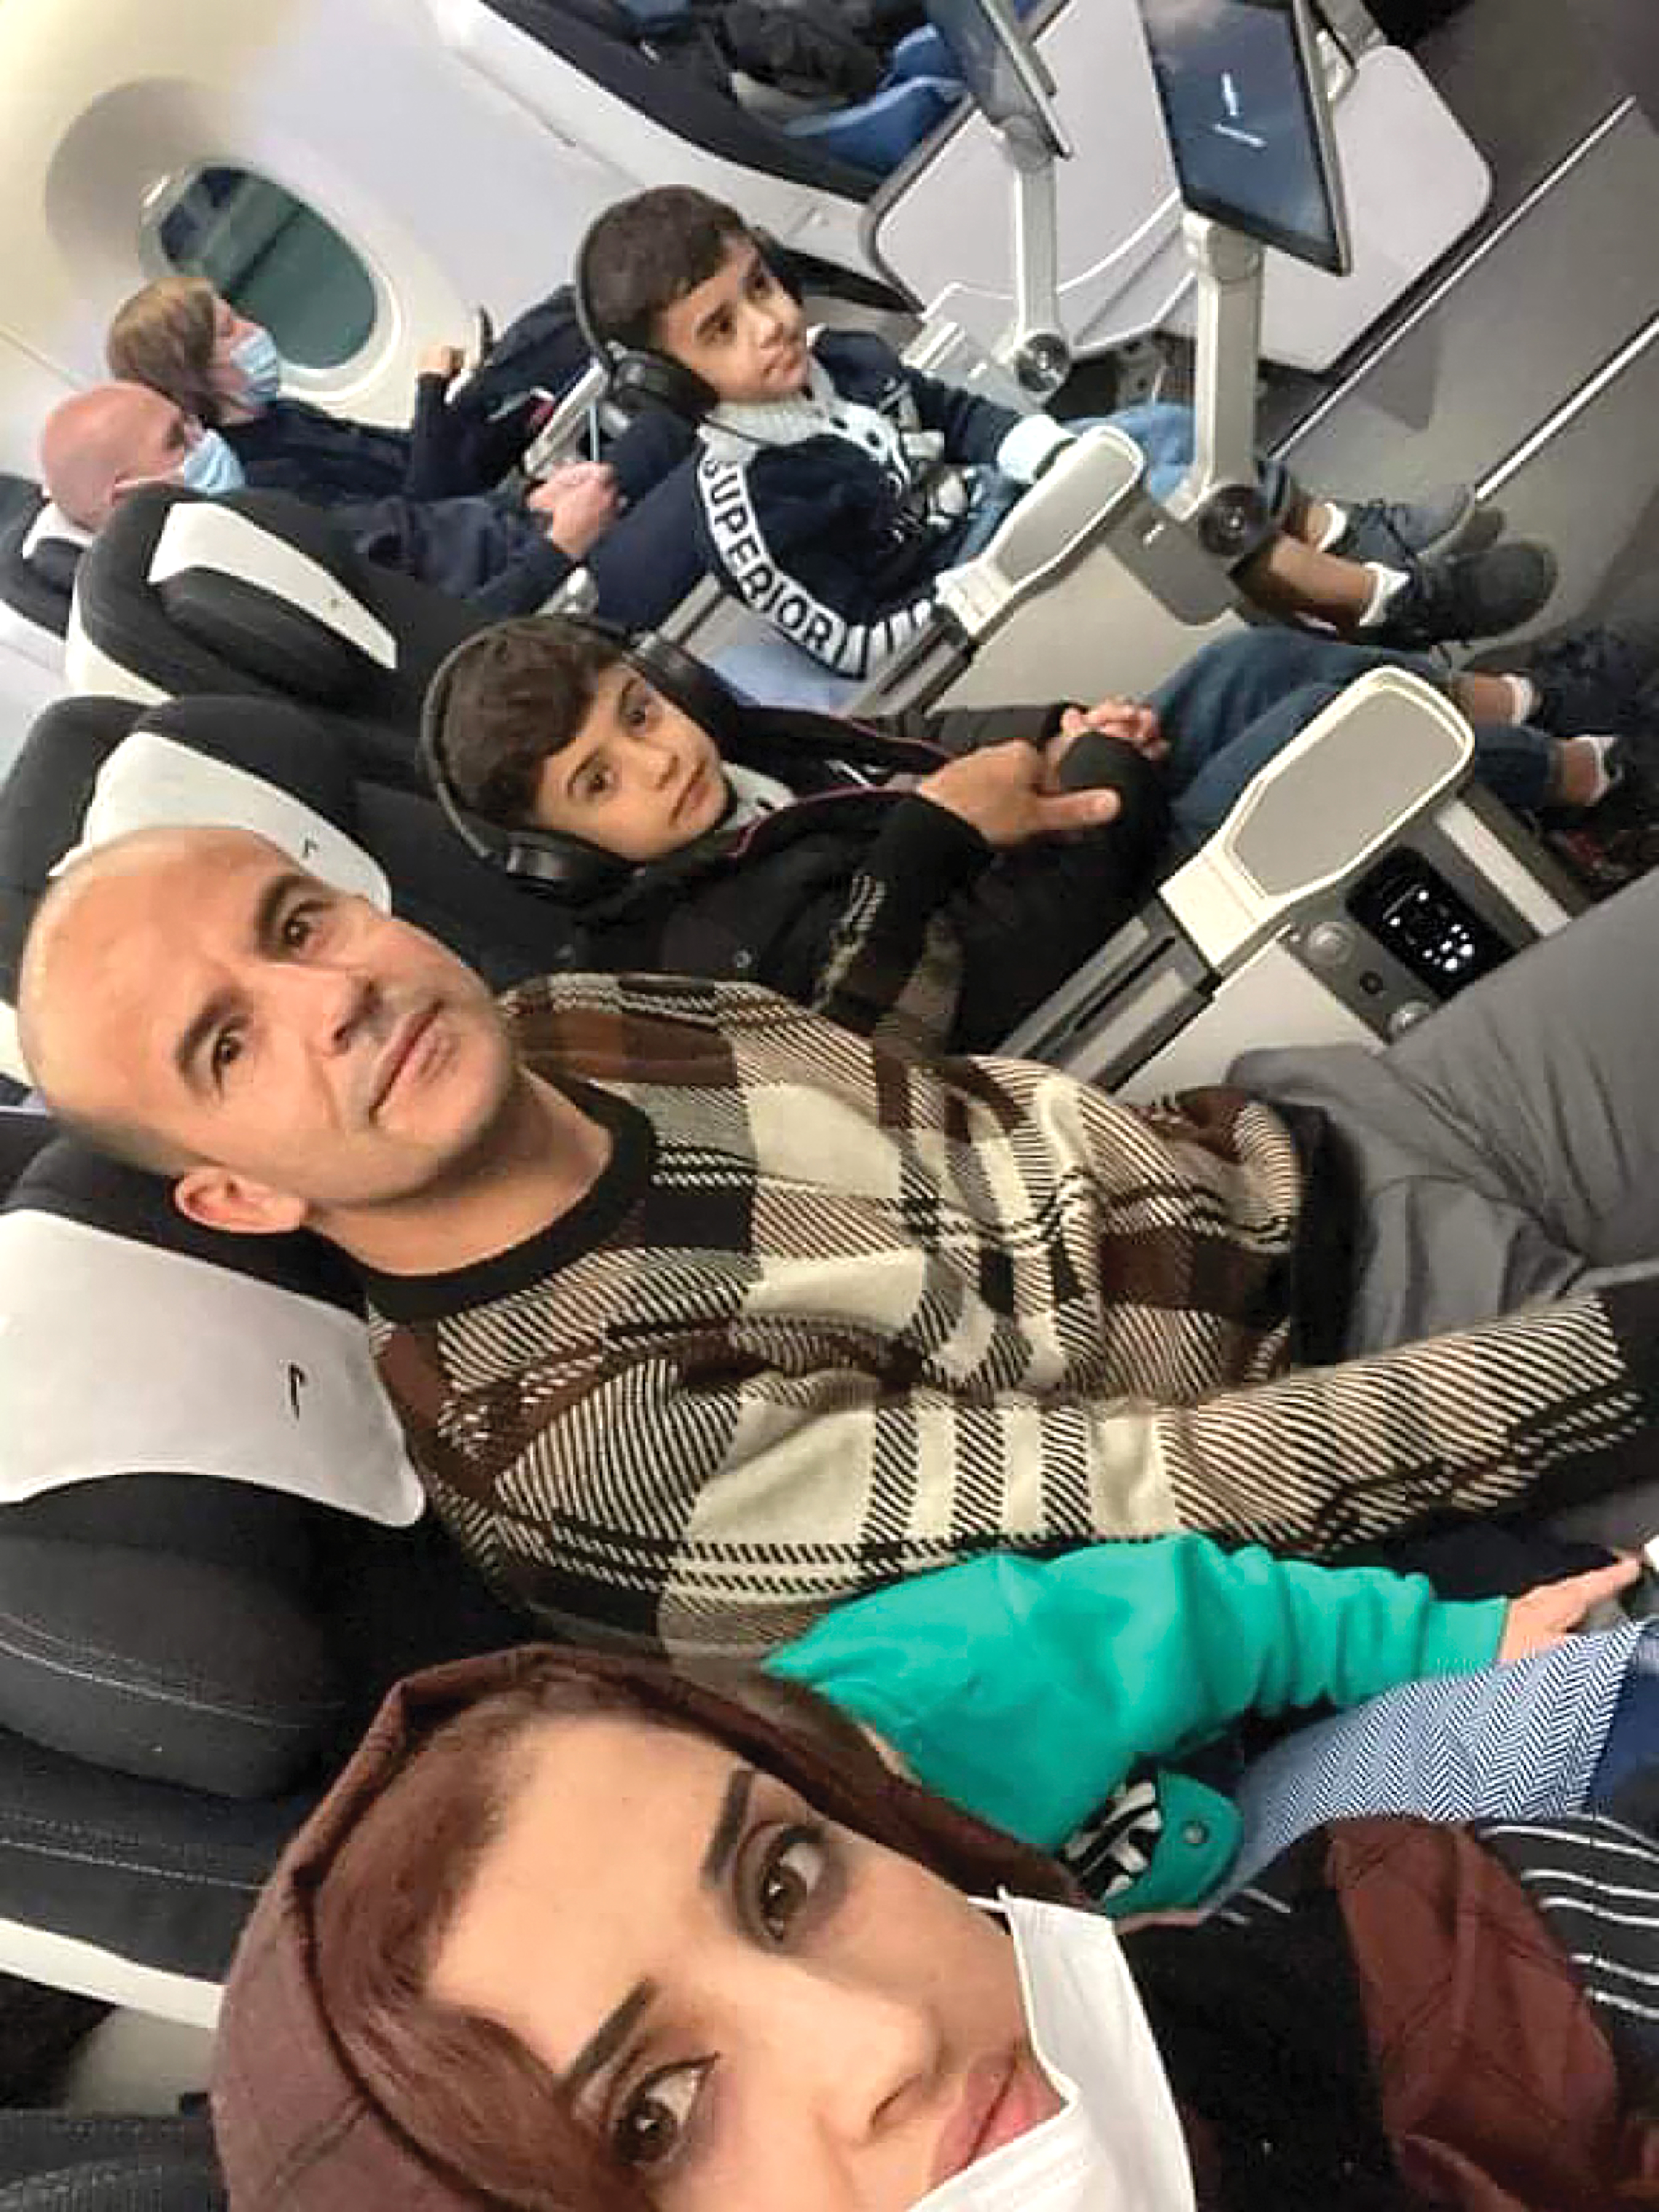 The Sediqi family en route from Islamabad to Vancouver.